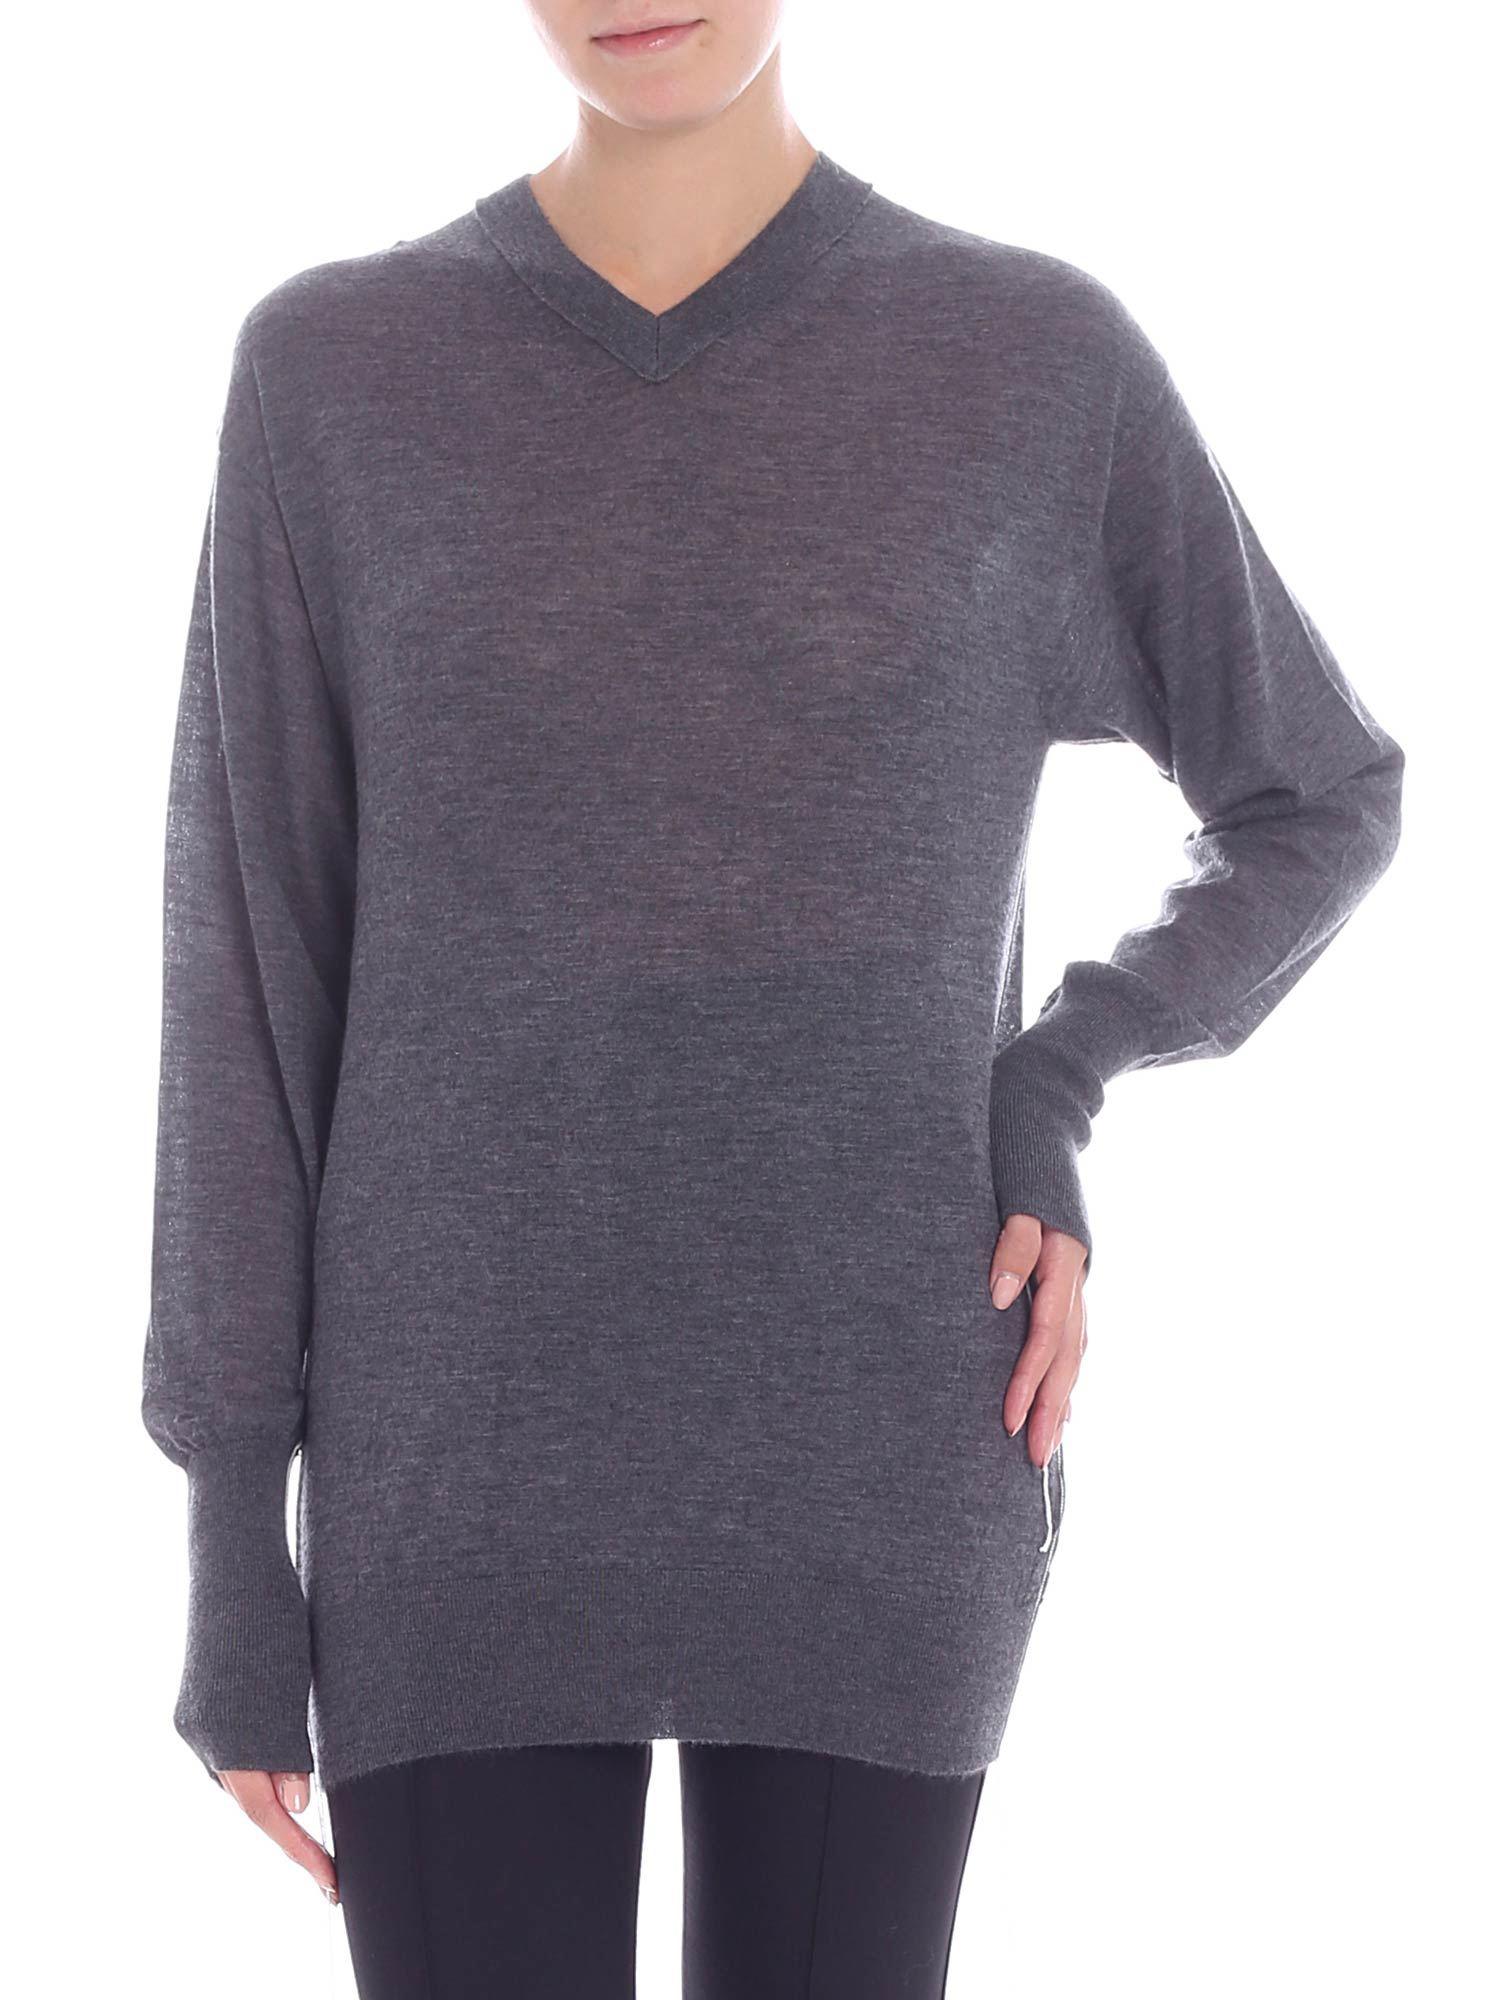 Helmut Lang Grey Cashmere Sweater in Gray - Lyst